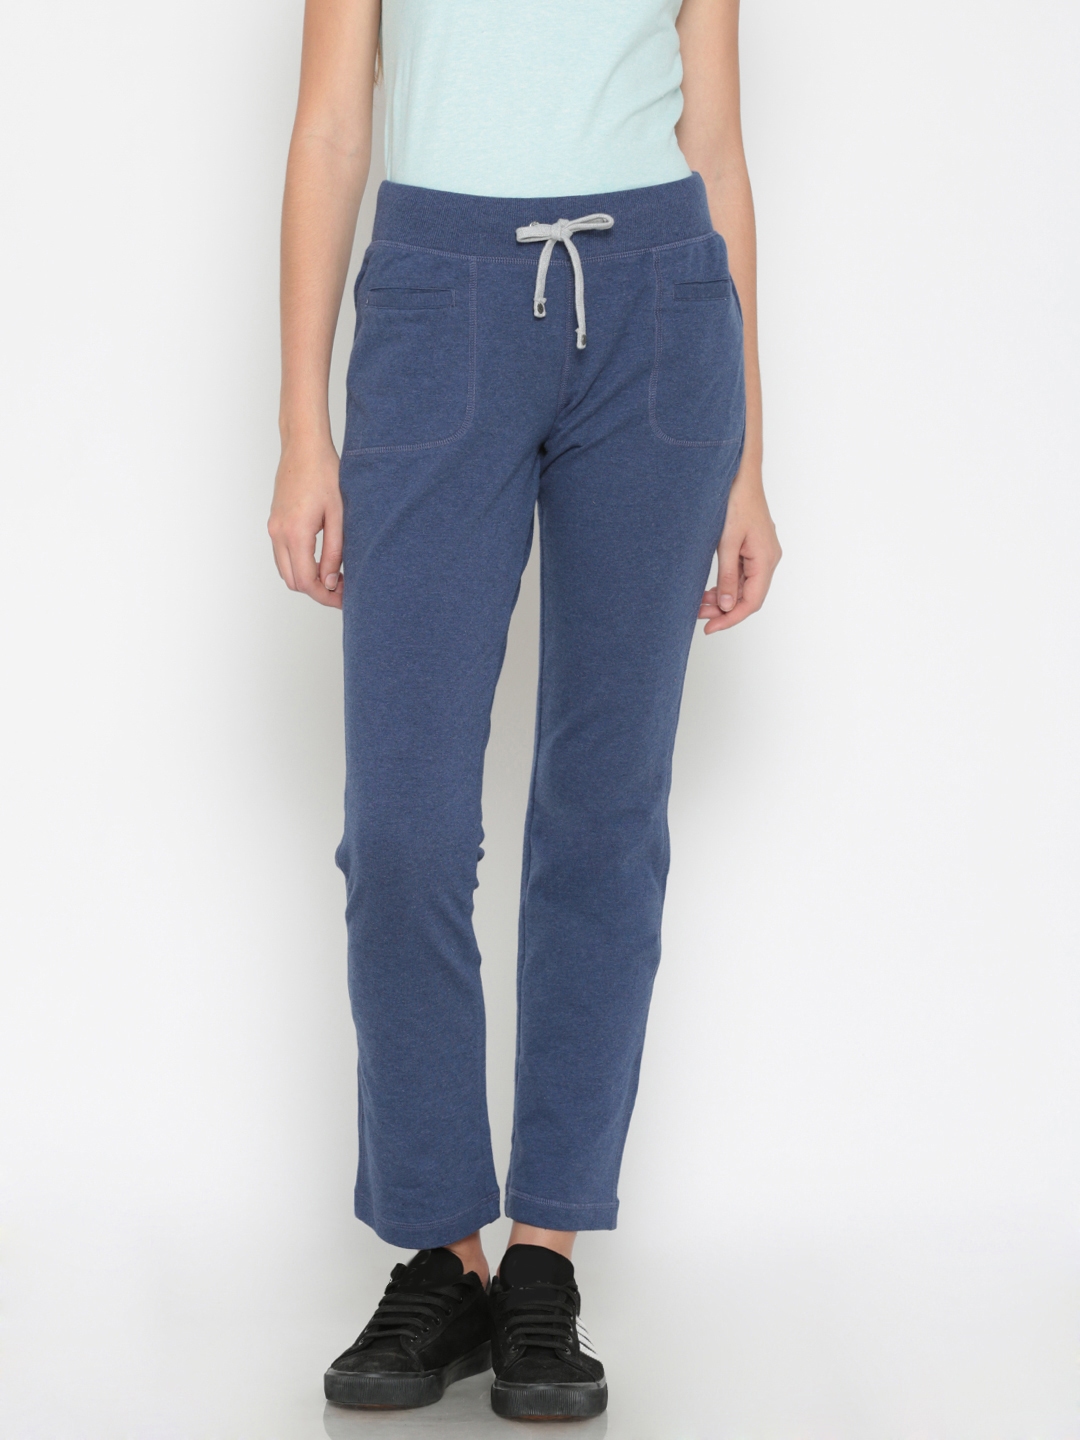 Jockey Women's Cotton Rich Relaxed Fit Contrast Side Piping and Pockets Track  pant -1305 – Online Shopping site in India